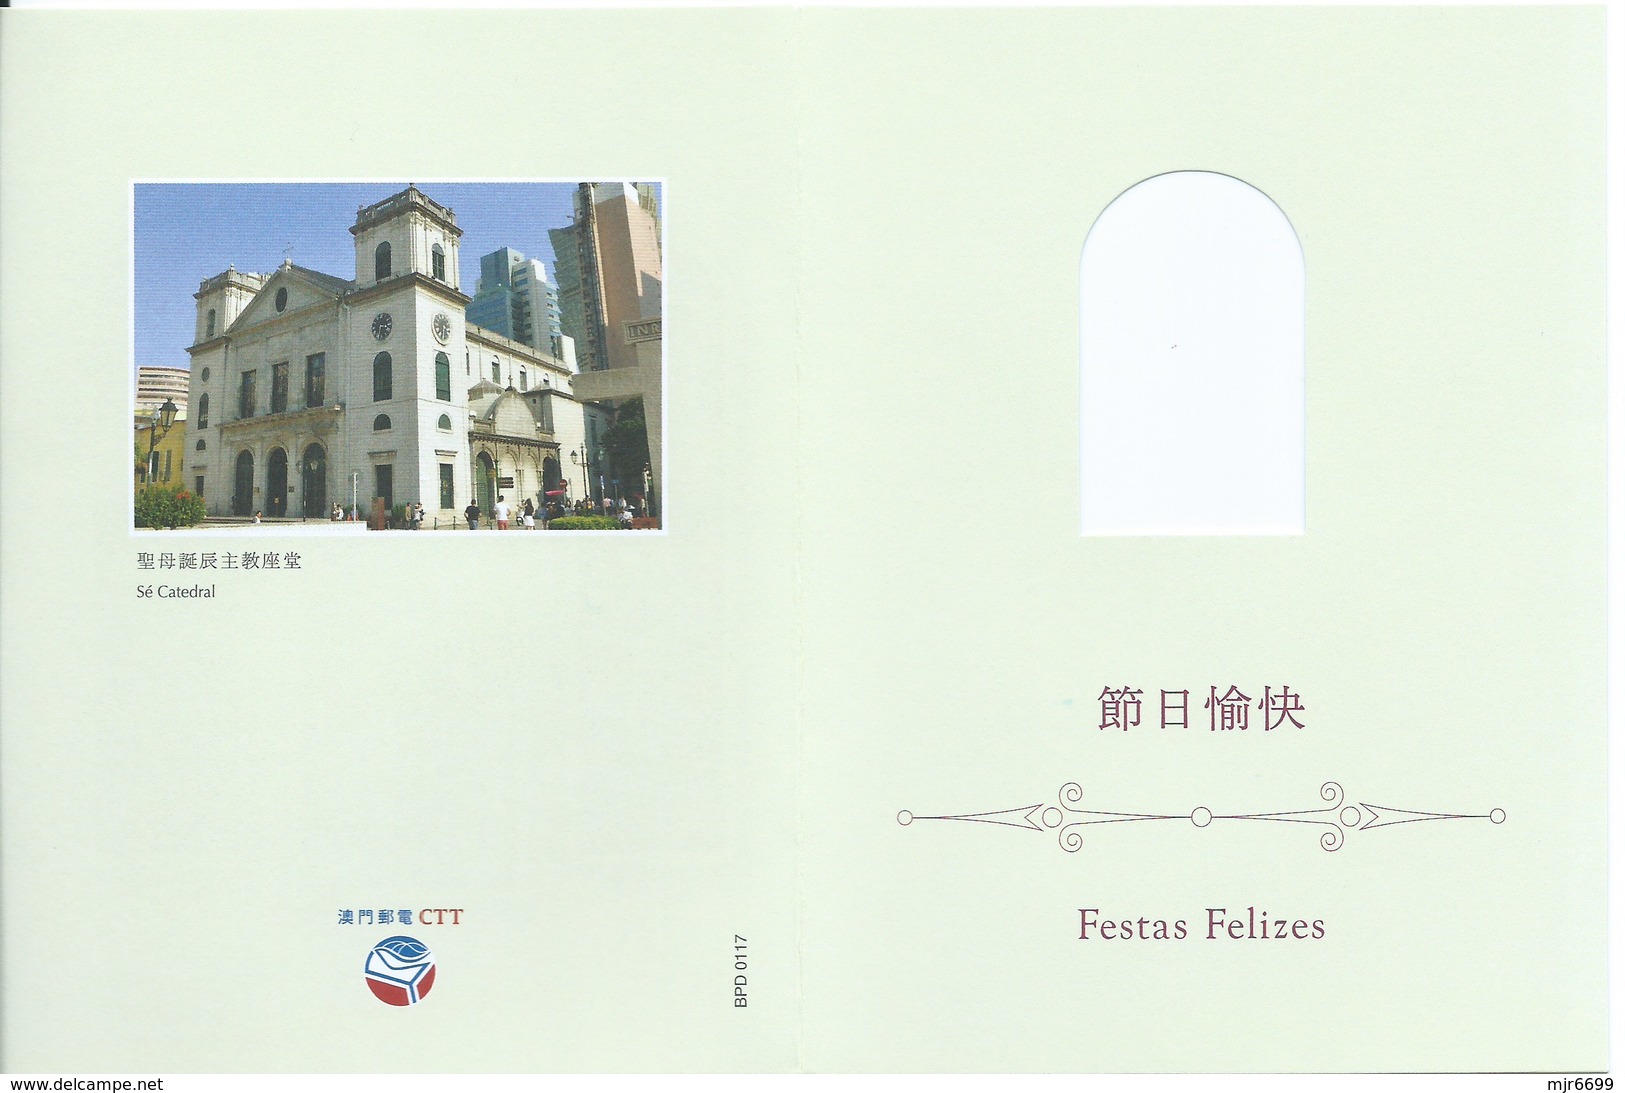 MACAU 2018 CHRISTMAS GREETING CARD & POSTAGE PAID COVER REGISTERD USAGE TO COLOANE, BEAUTIFUL COVER & CARD - Entiers Postaux